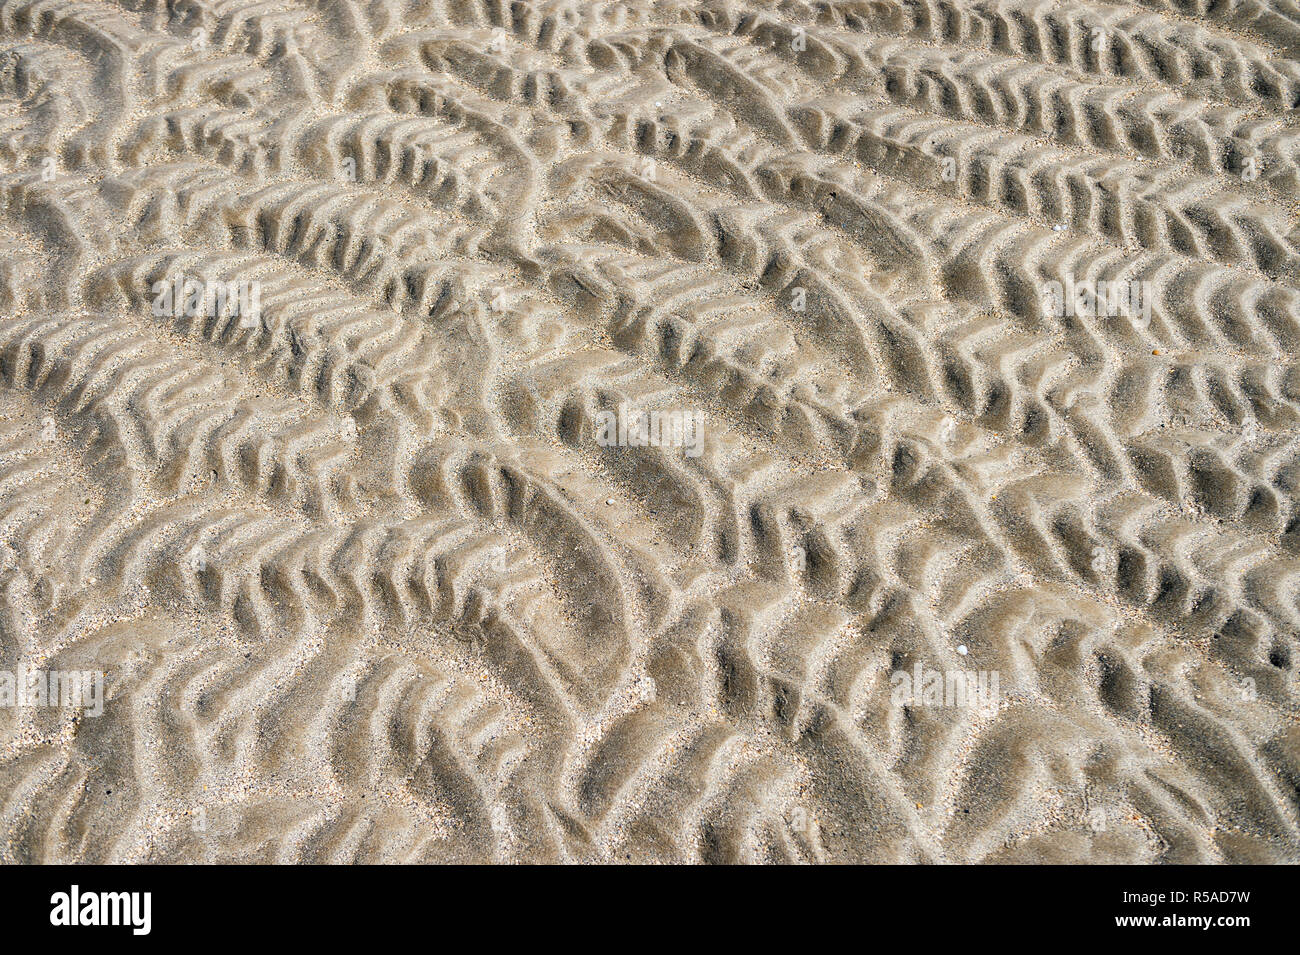 Natural textured background of wave patterns left at low tide in silky sand in a full frame abstract close up Stock Photo